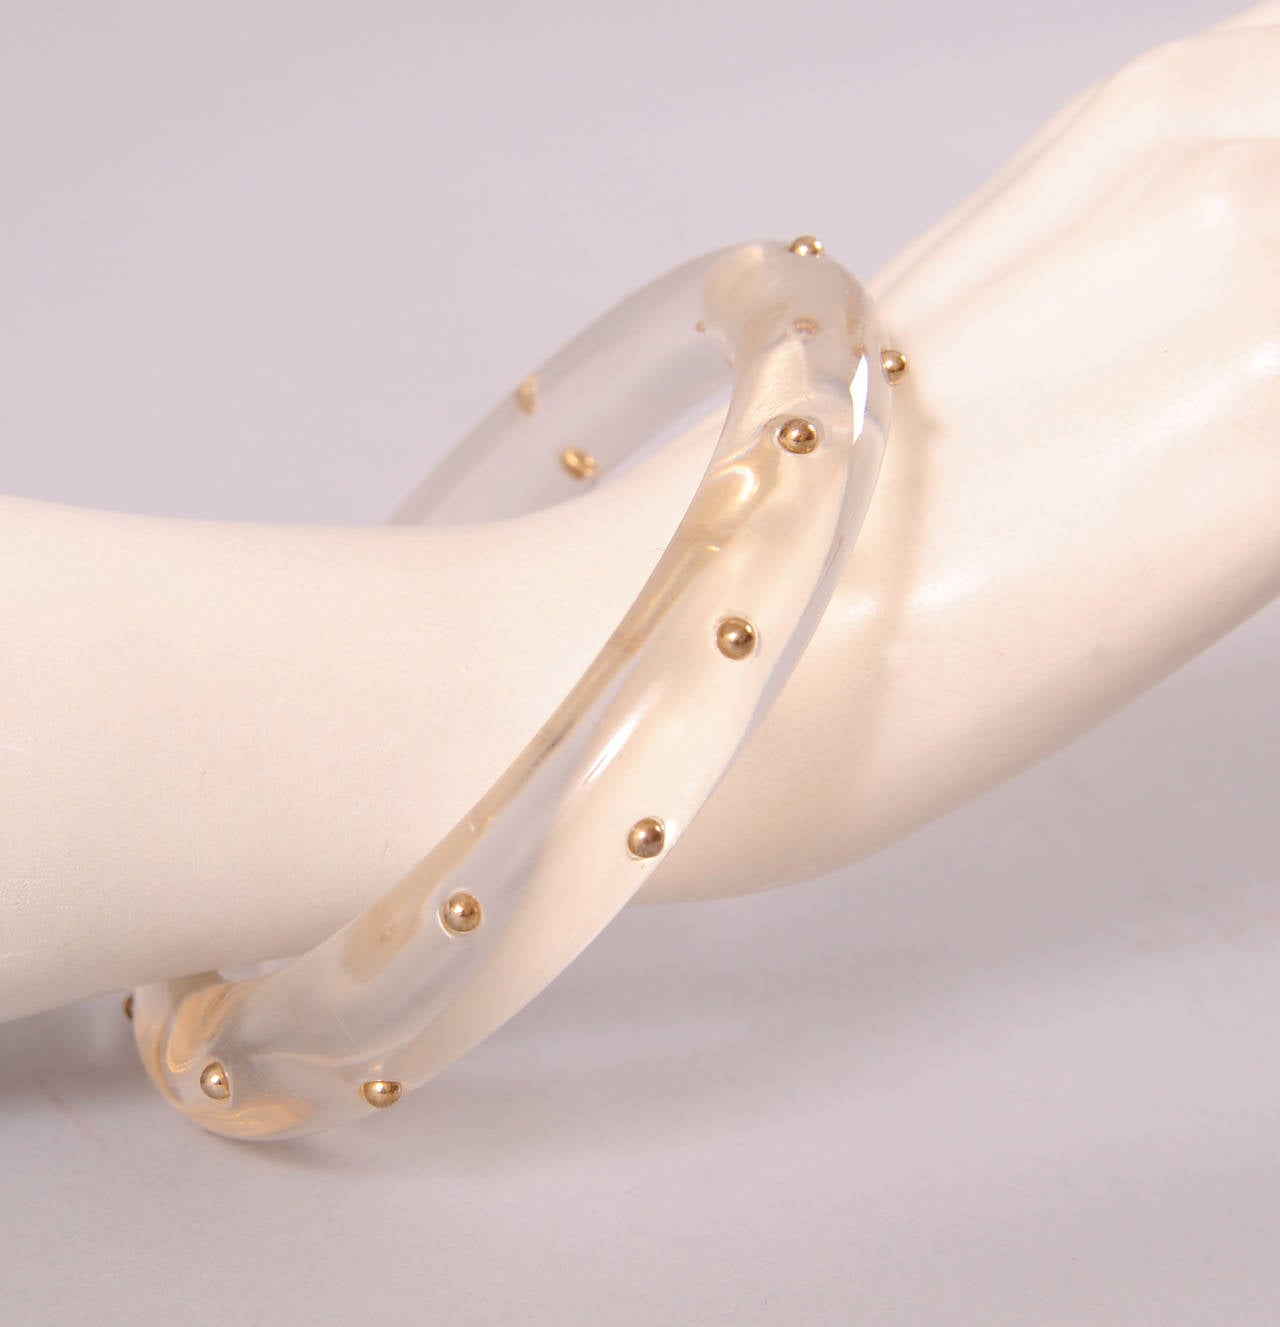 Clear Lucite is studded with real gold beads creating a great and rare juxtaposition of these materials. The bracelet is in excellent condition.
Measurements;
Height 5/8